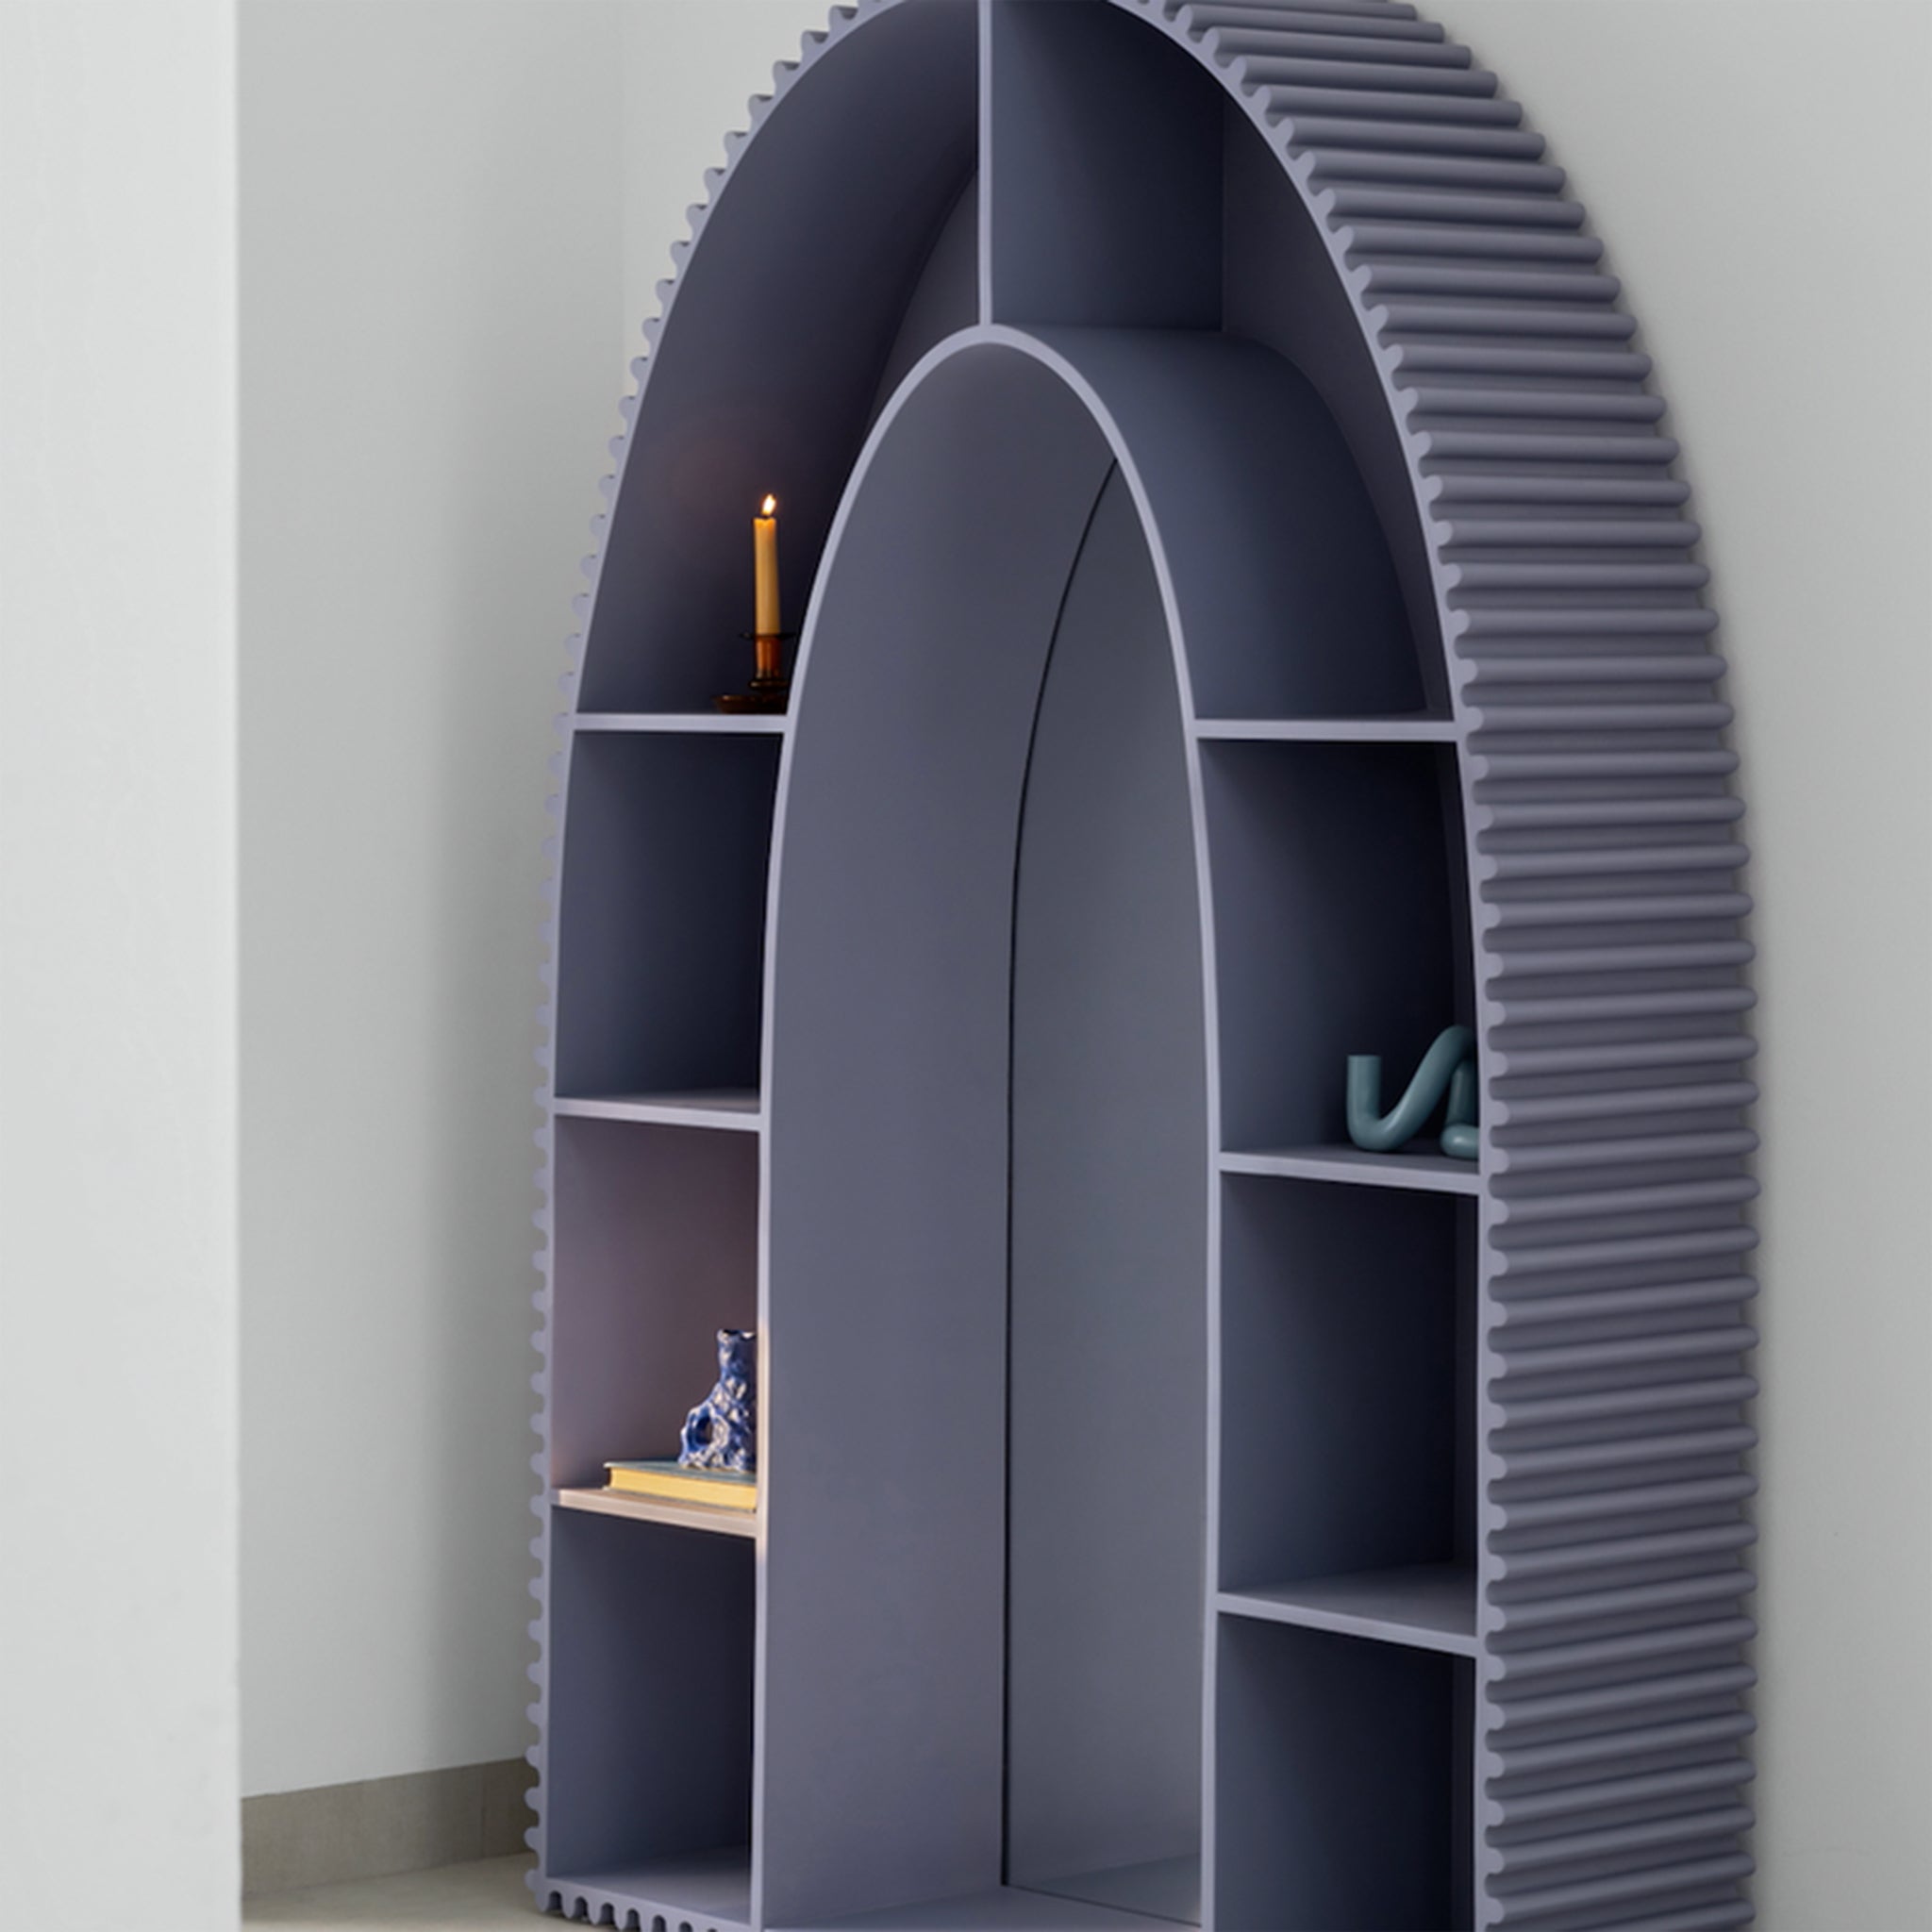 Side view of a modern, arch-shaped bookshelf in muted gray, showcasing its grooved edges and integrated mirror in the center. The shelves contain a candle, a decorative figurine, and other small items, positioned against a light gray wall.